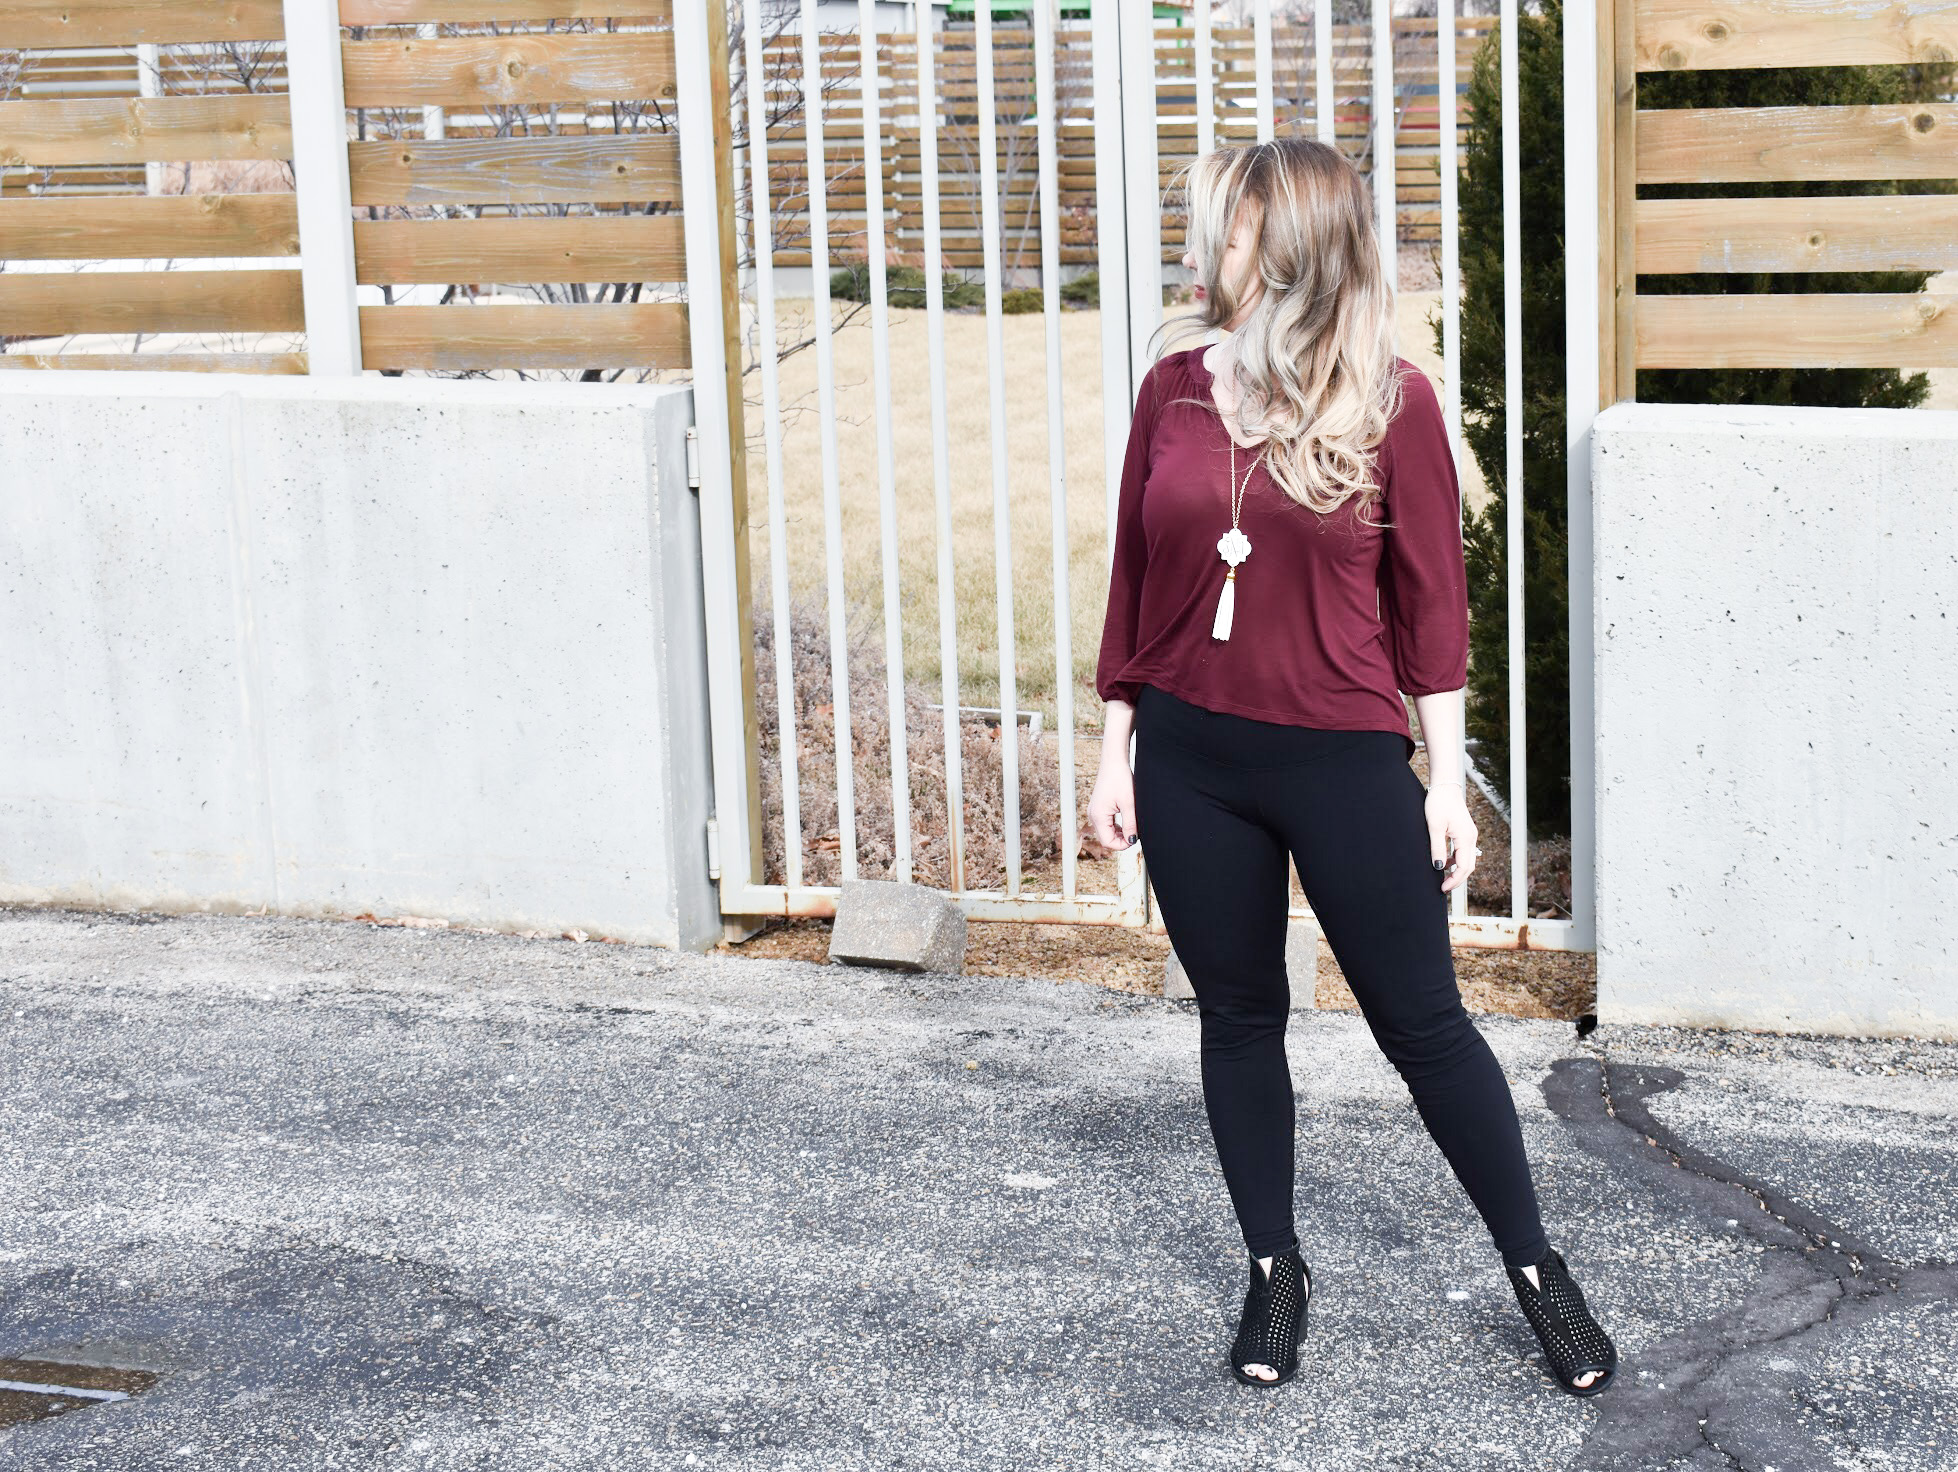 Ideas to style knit leggings for wintertime? Dress up or down? : r/OUTFITS